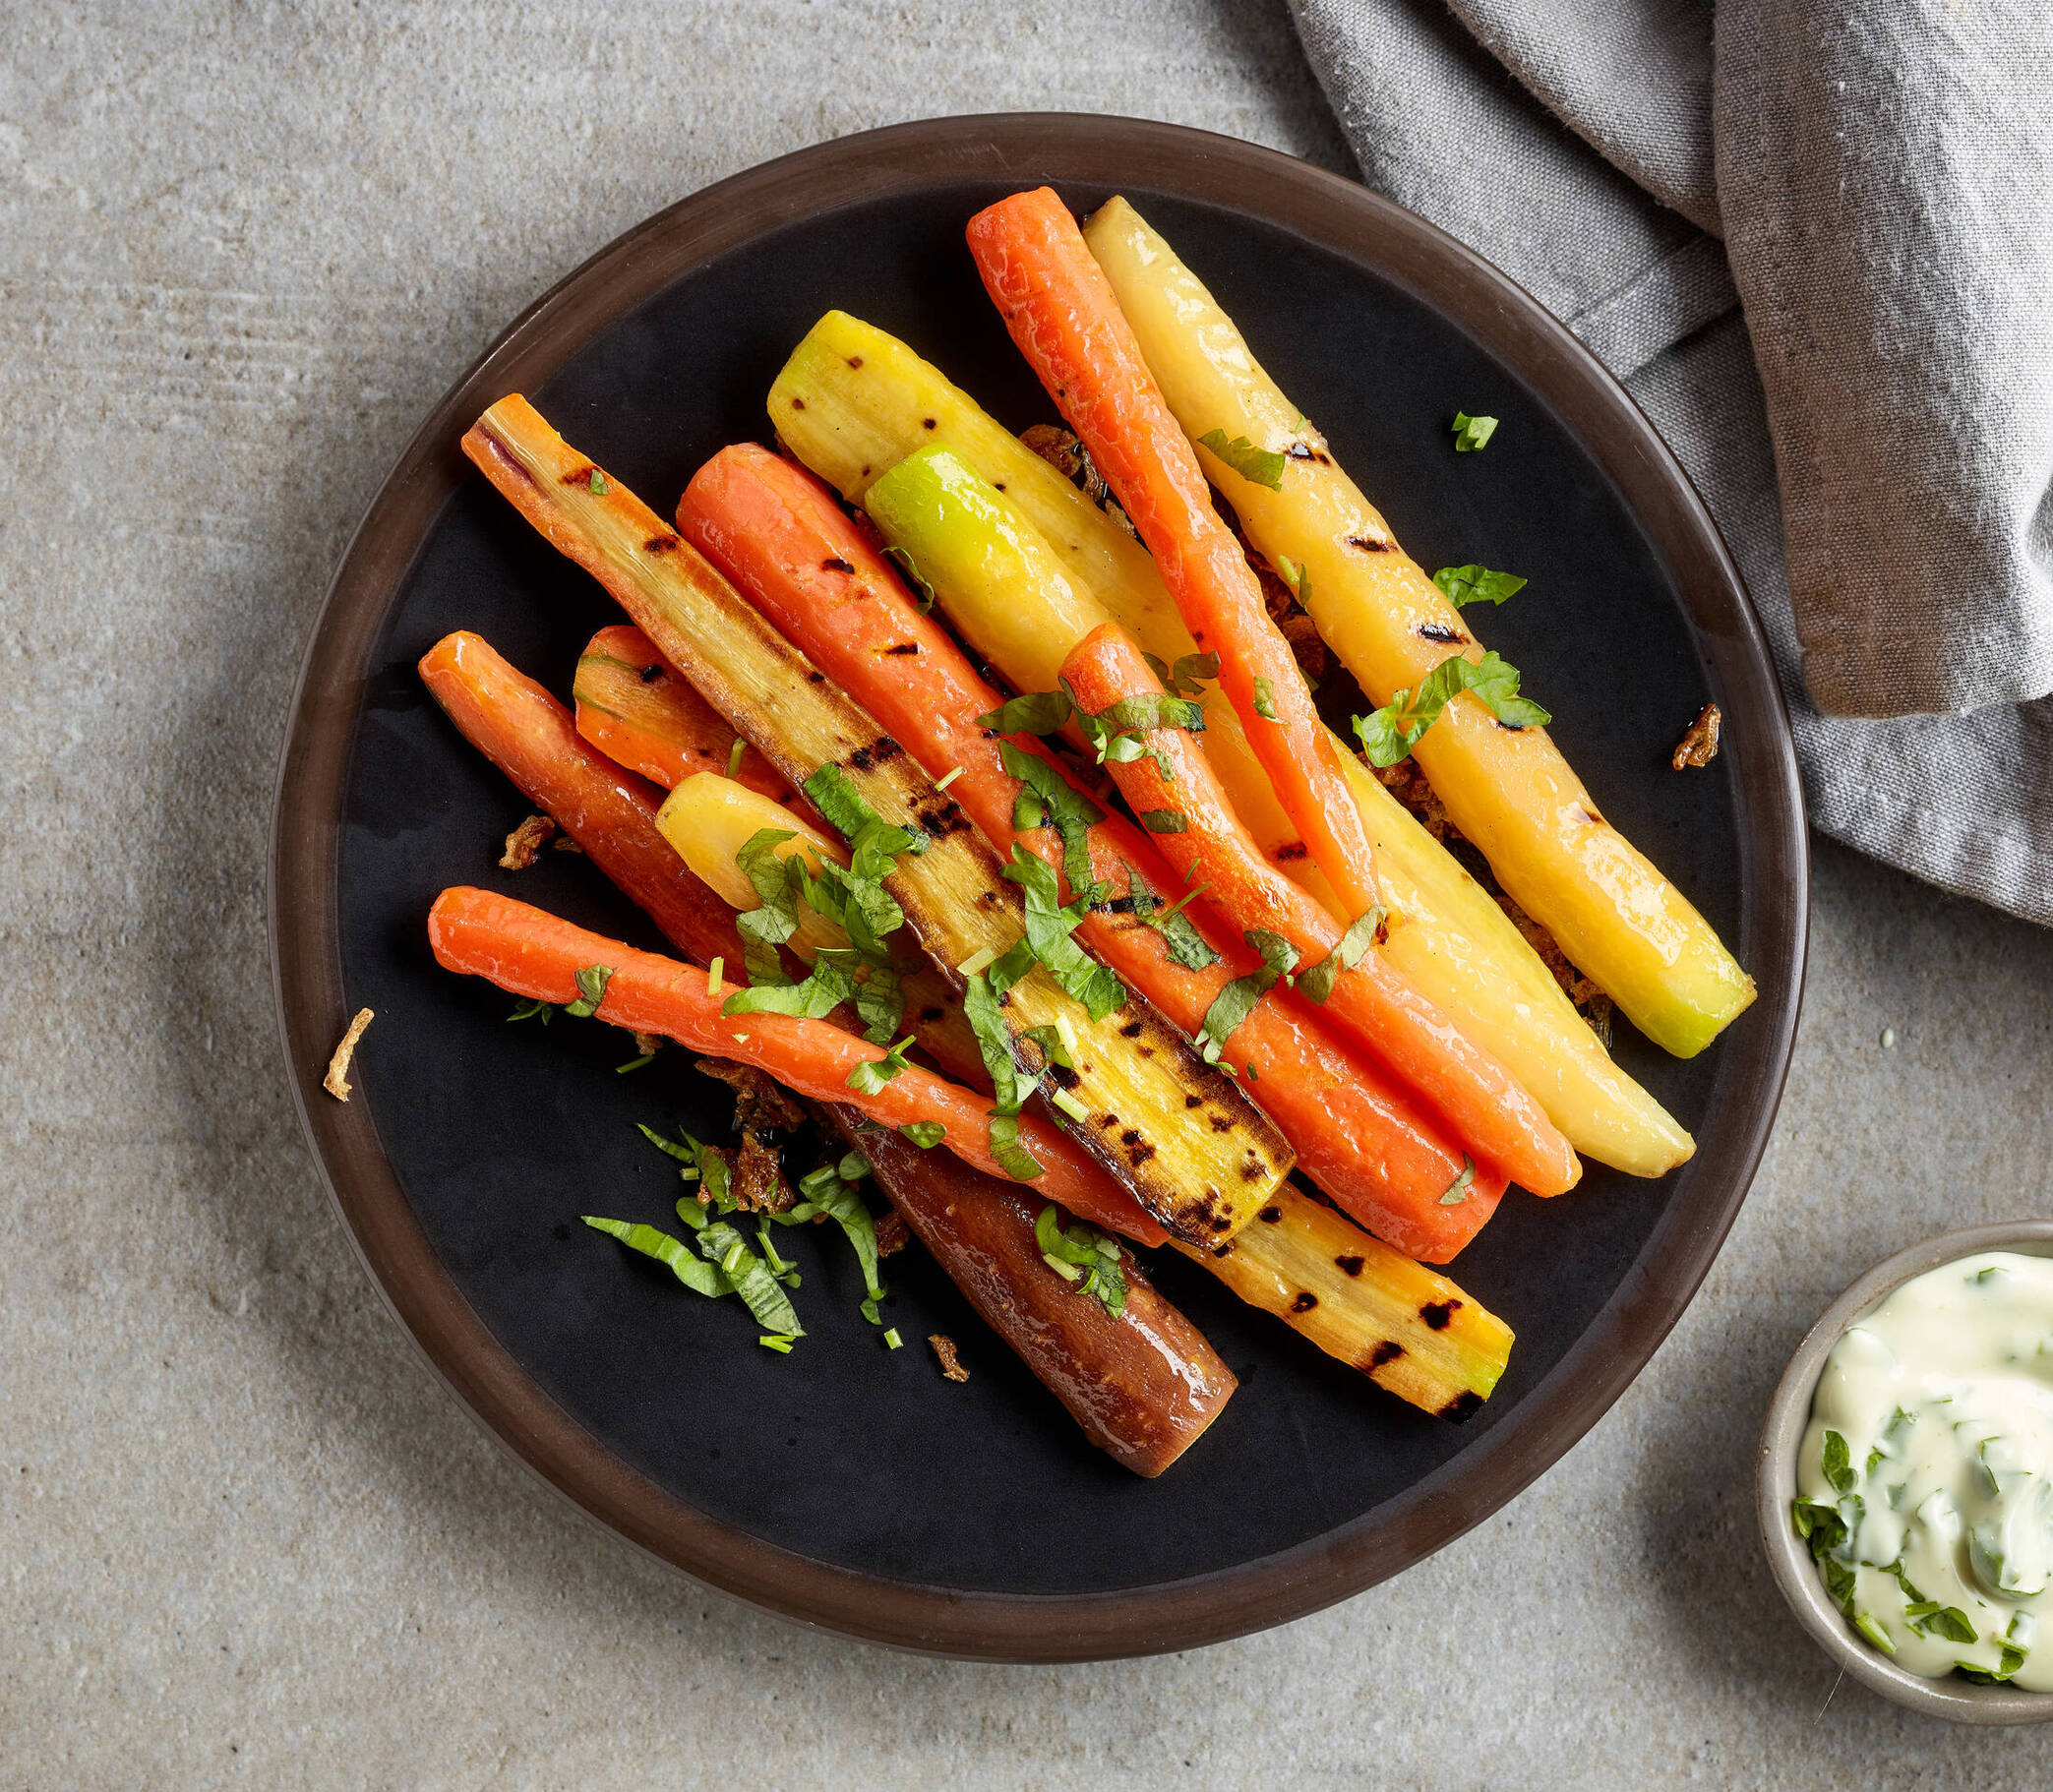 Are Carrots Low FODMAP?